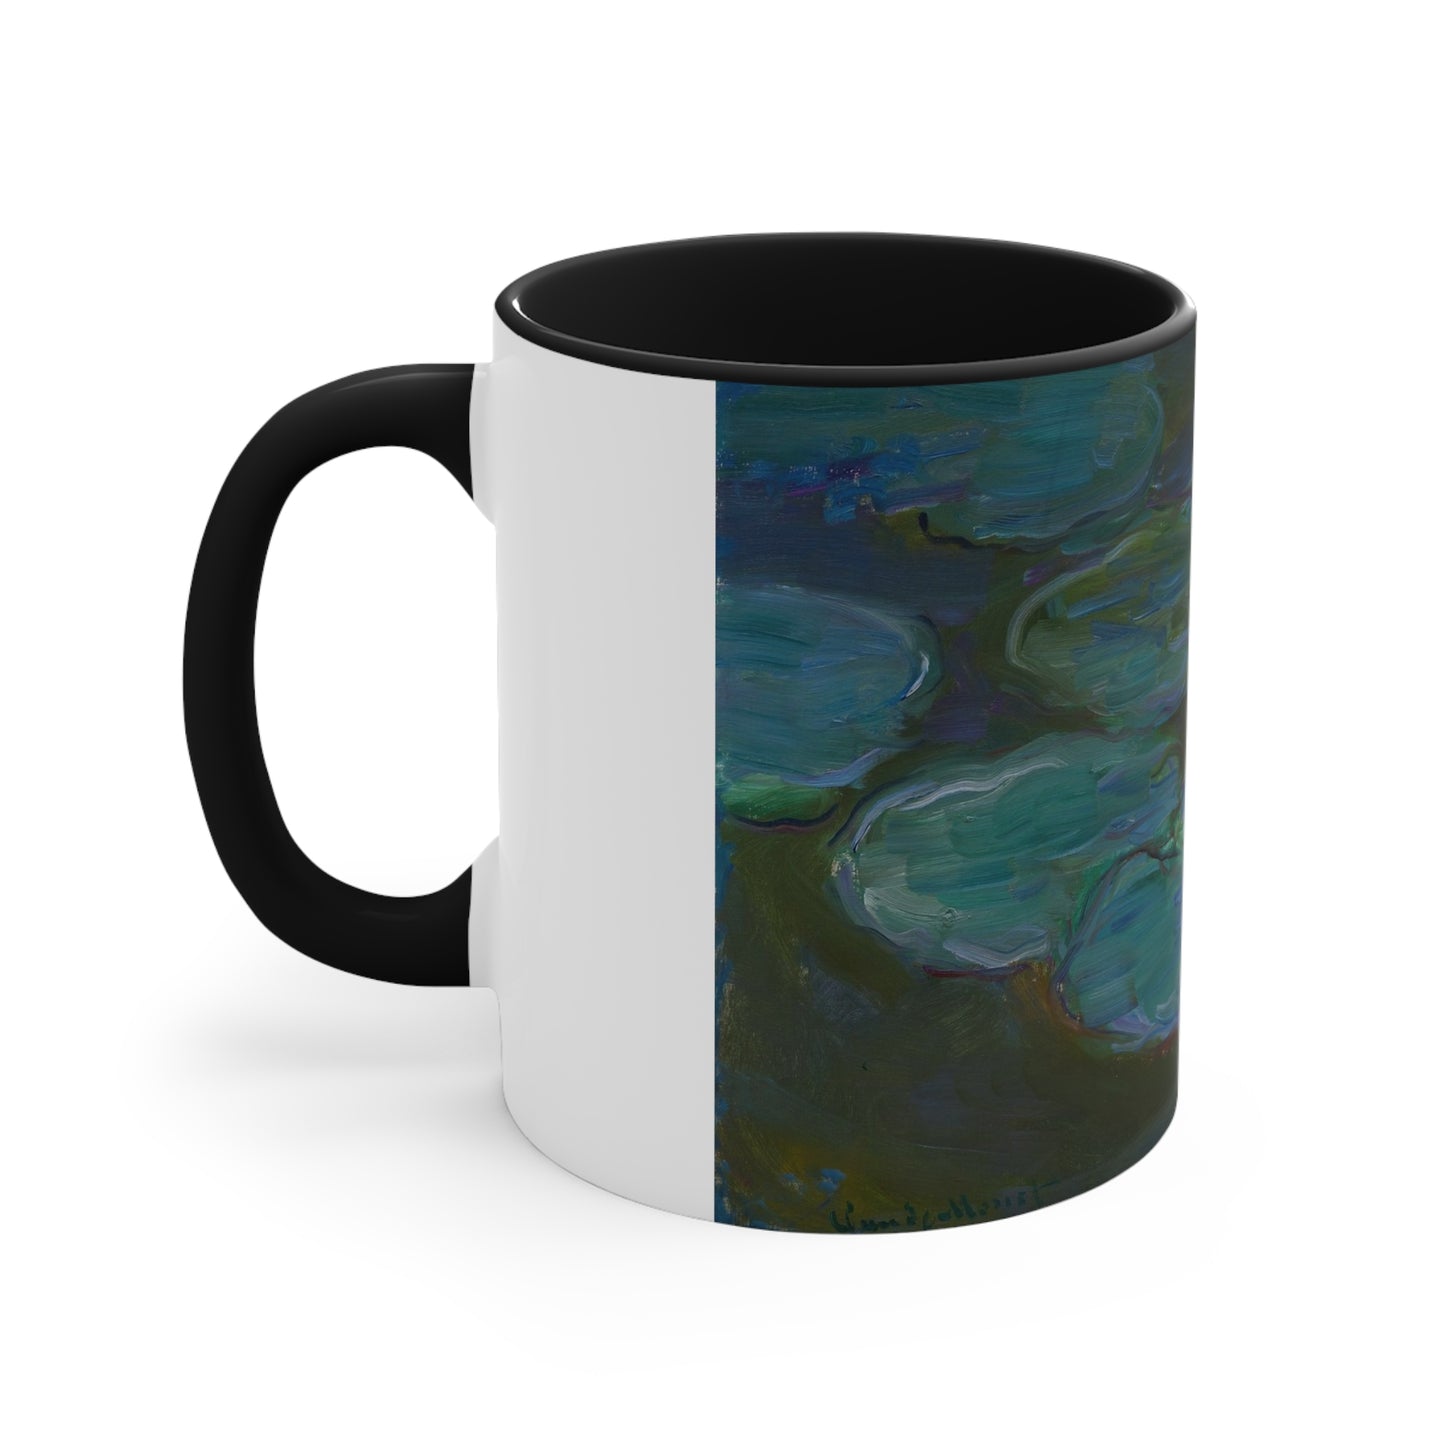 a black and white coffee mug with a painting on it